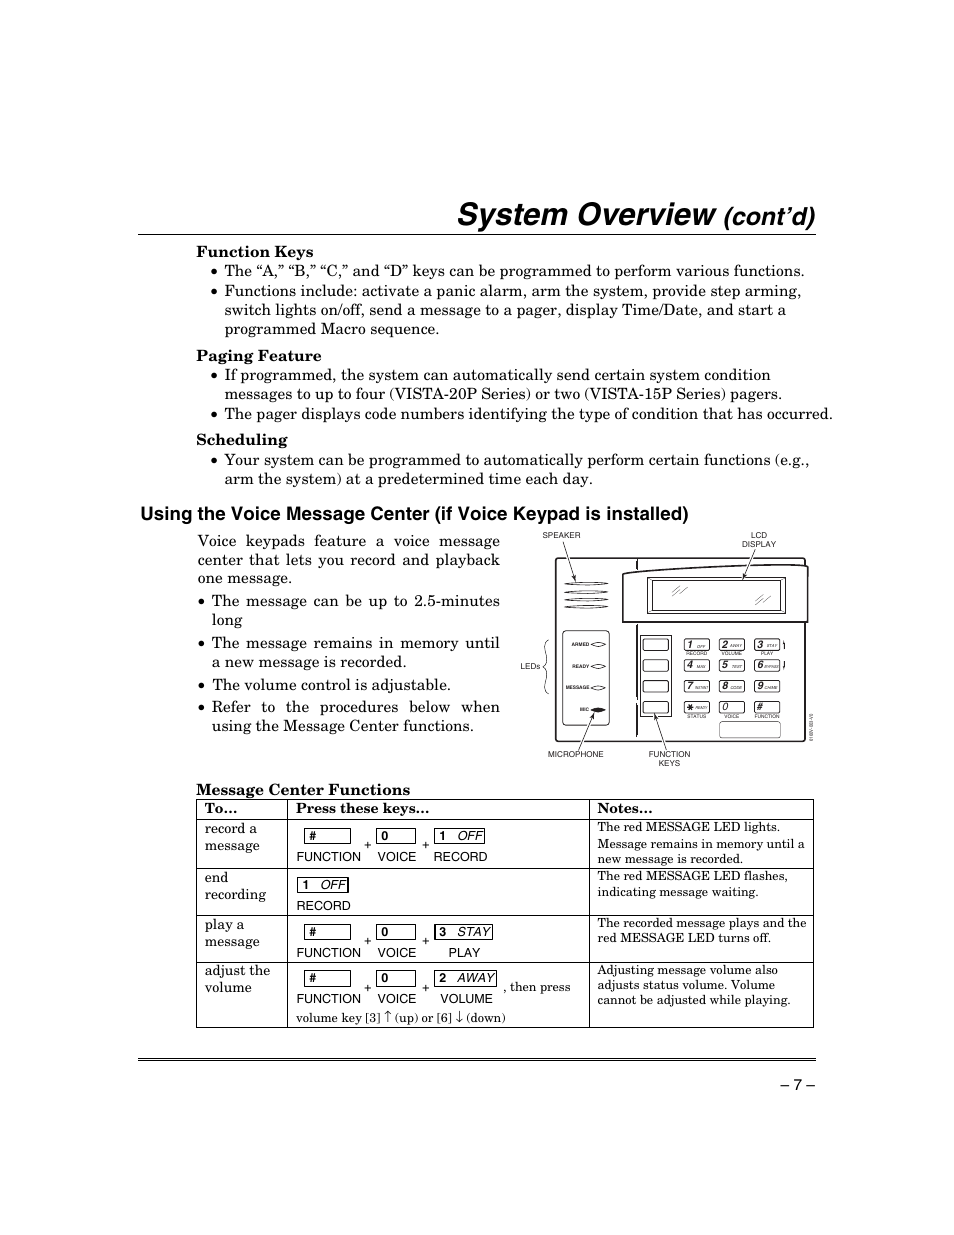 System overview, Cont’d), Message center functions | Honeywell ADEMCO VISTA VISTA-20PSIA User Manual | Page 7 / 64